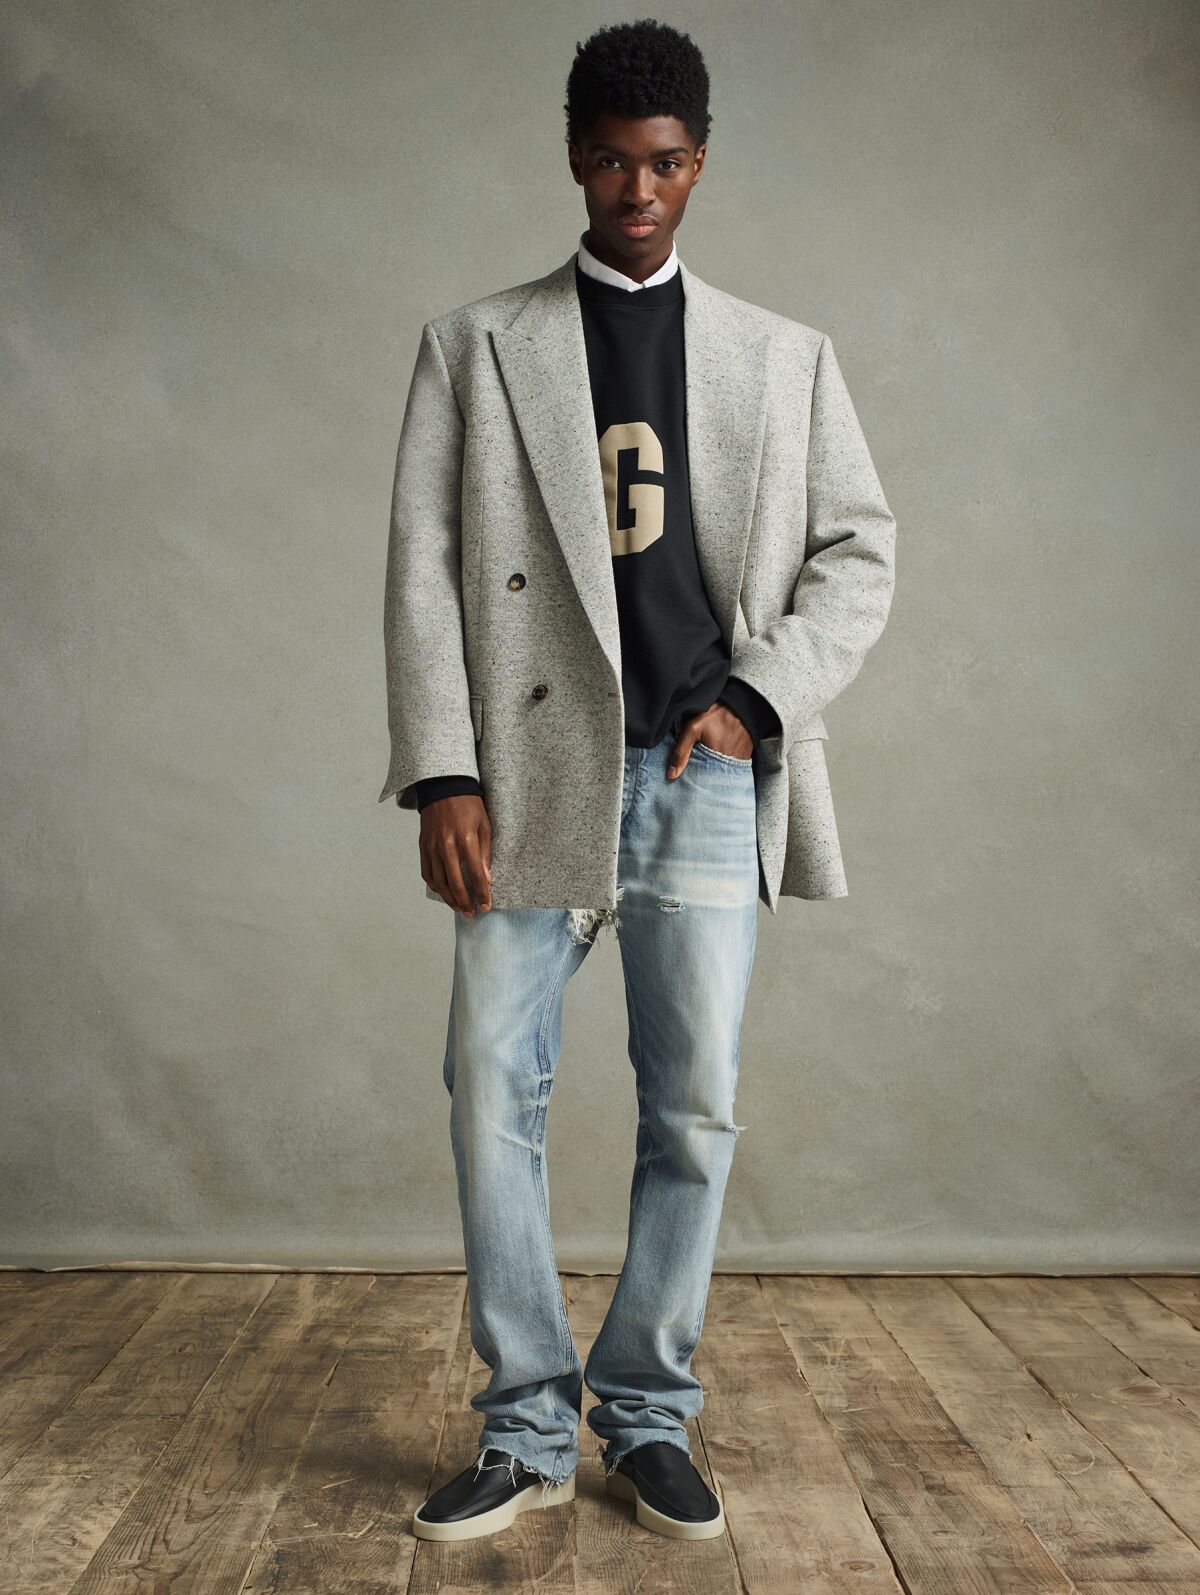 Fear of God's seventh collection pays homage to the Homestead Grays alongside the brand's staple denim pieces.